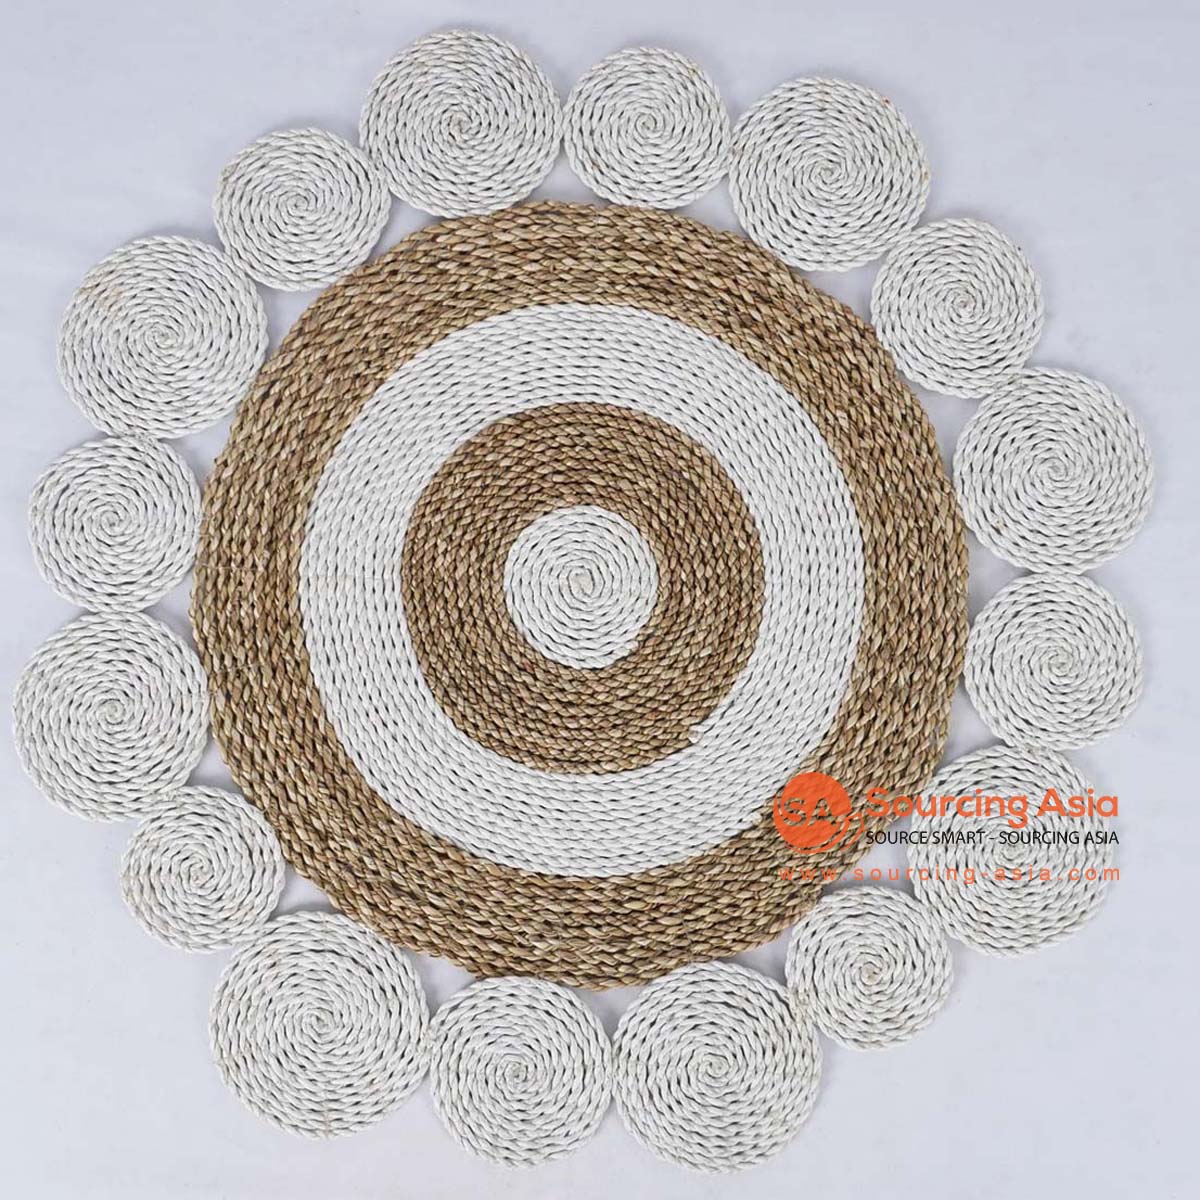 HBSC357 NATURAL AND WHITE SEAGRASS DECORATIVE ROUND RUG